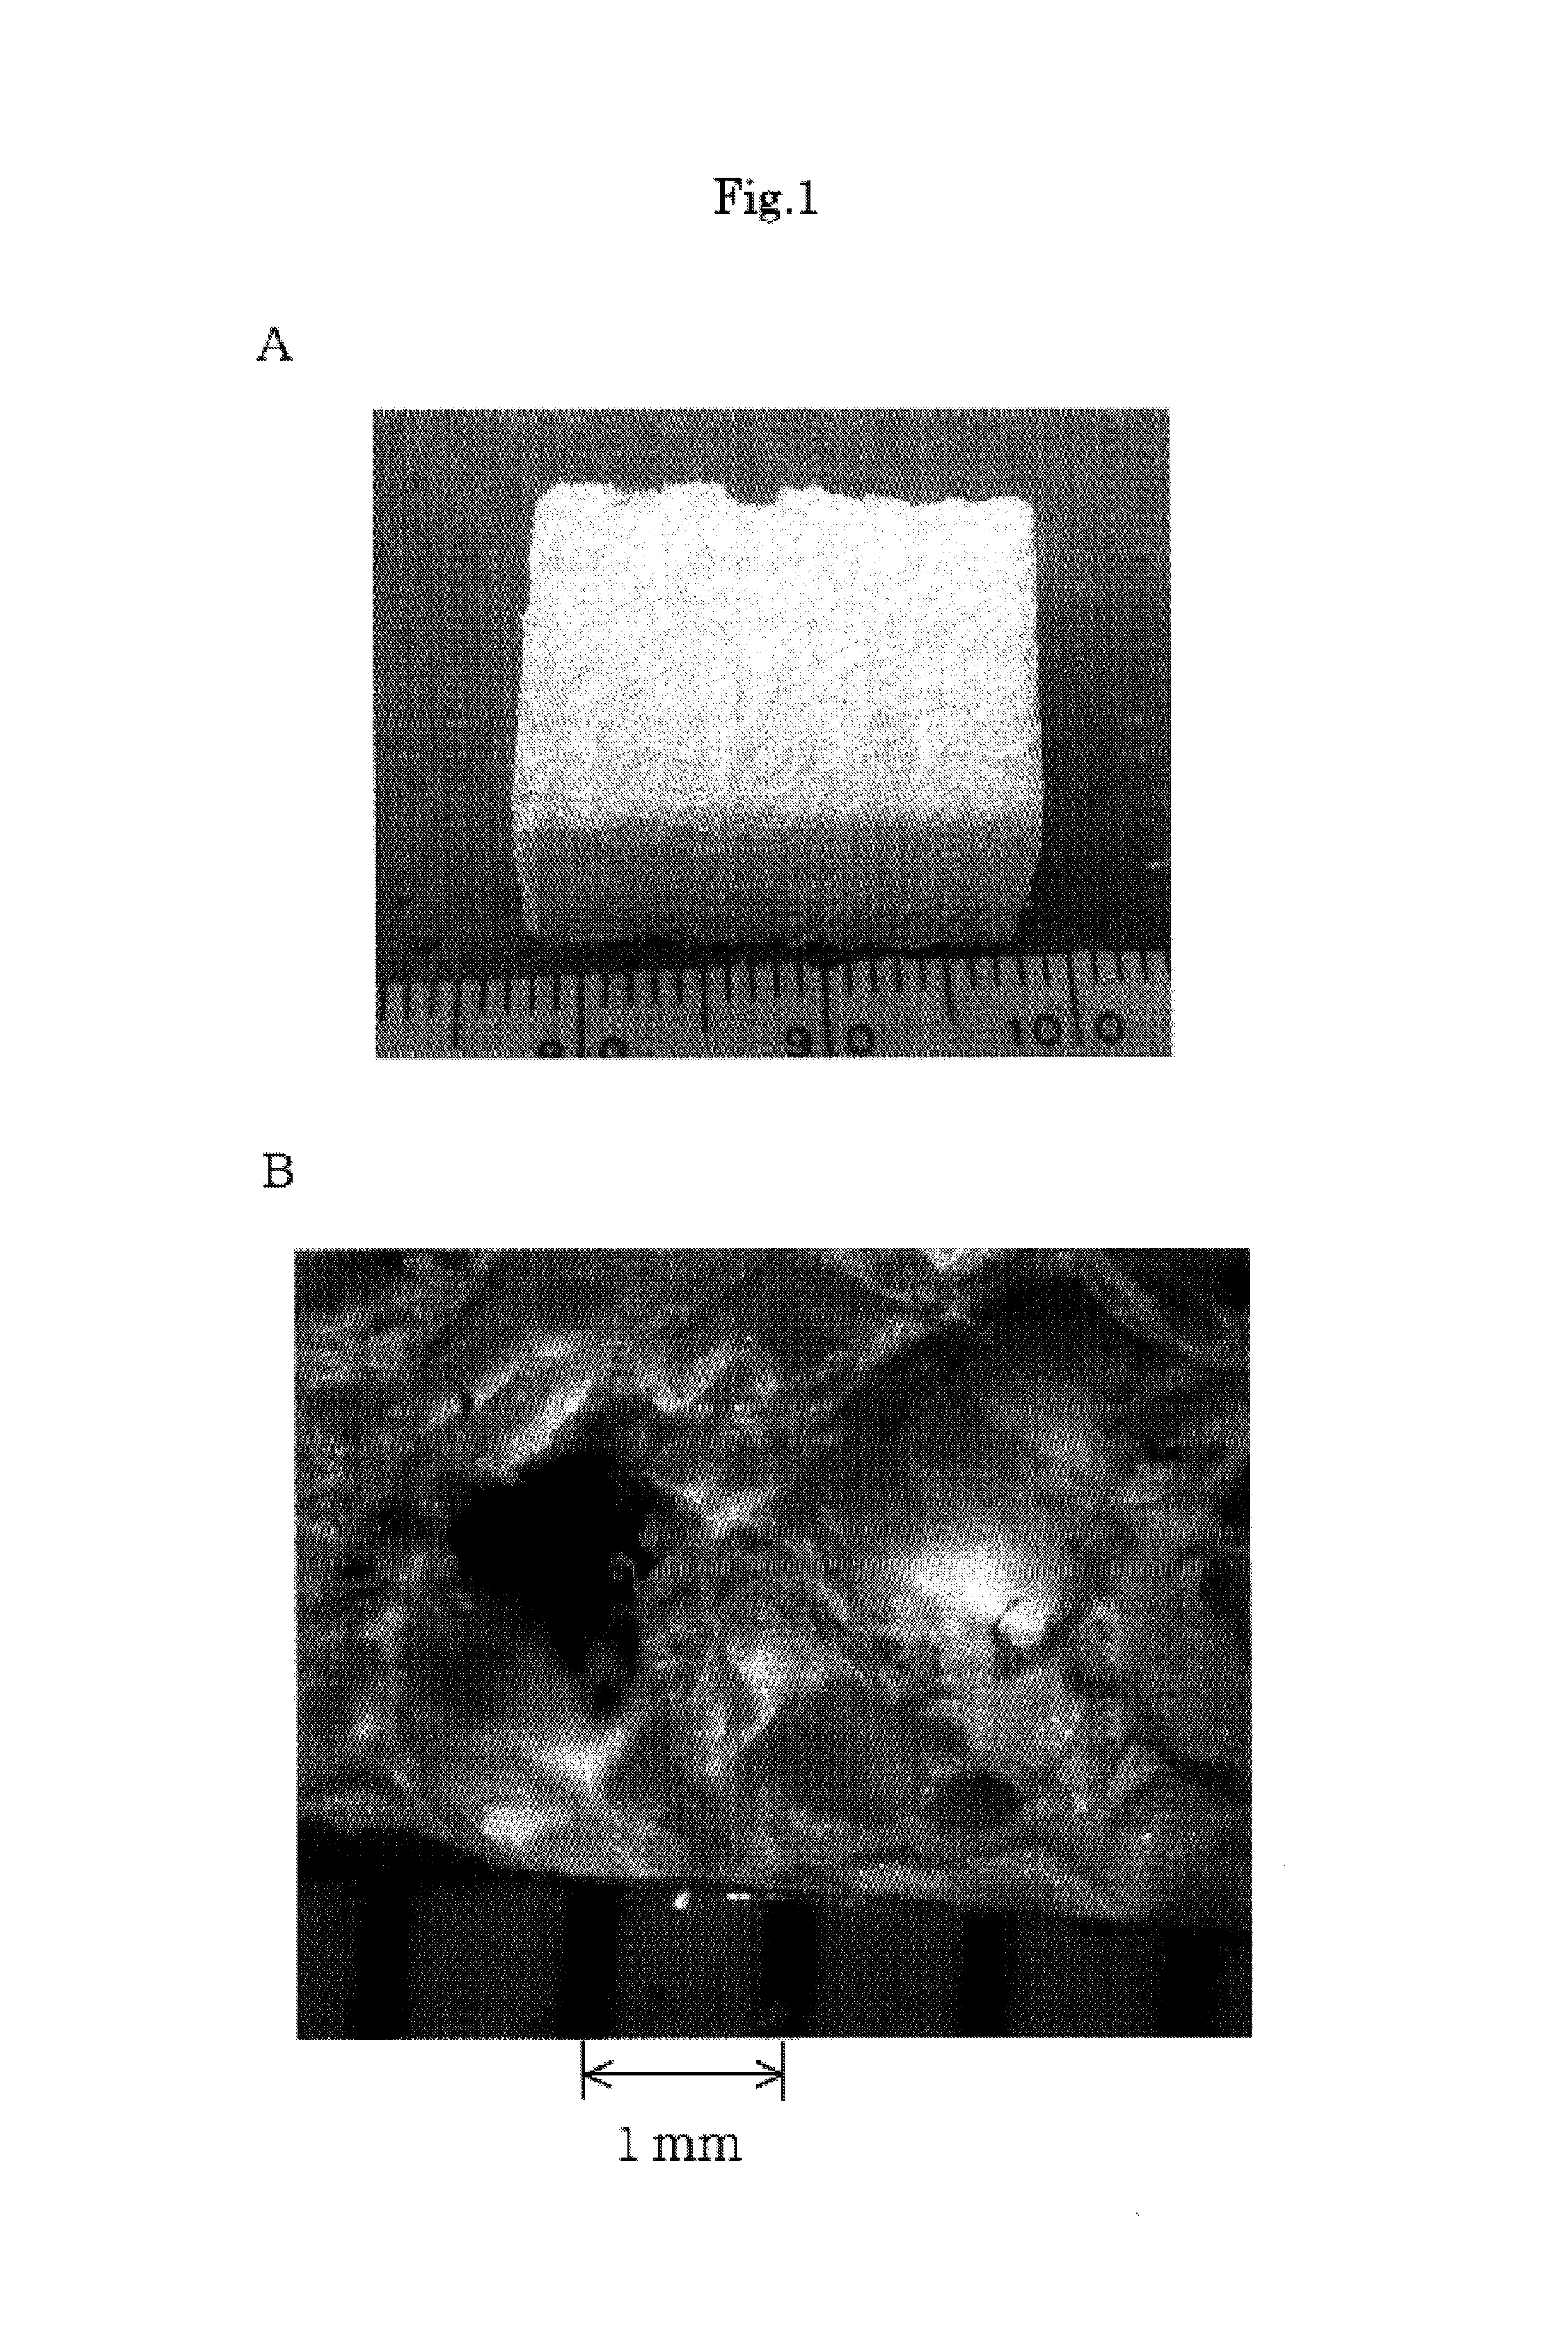 Process for producing porous composite materials